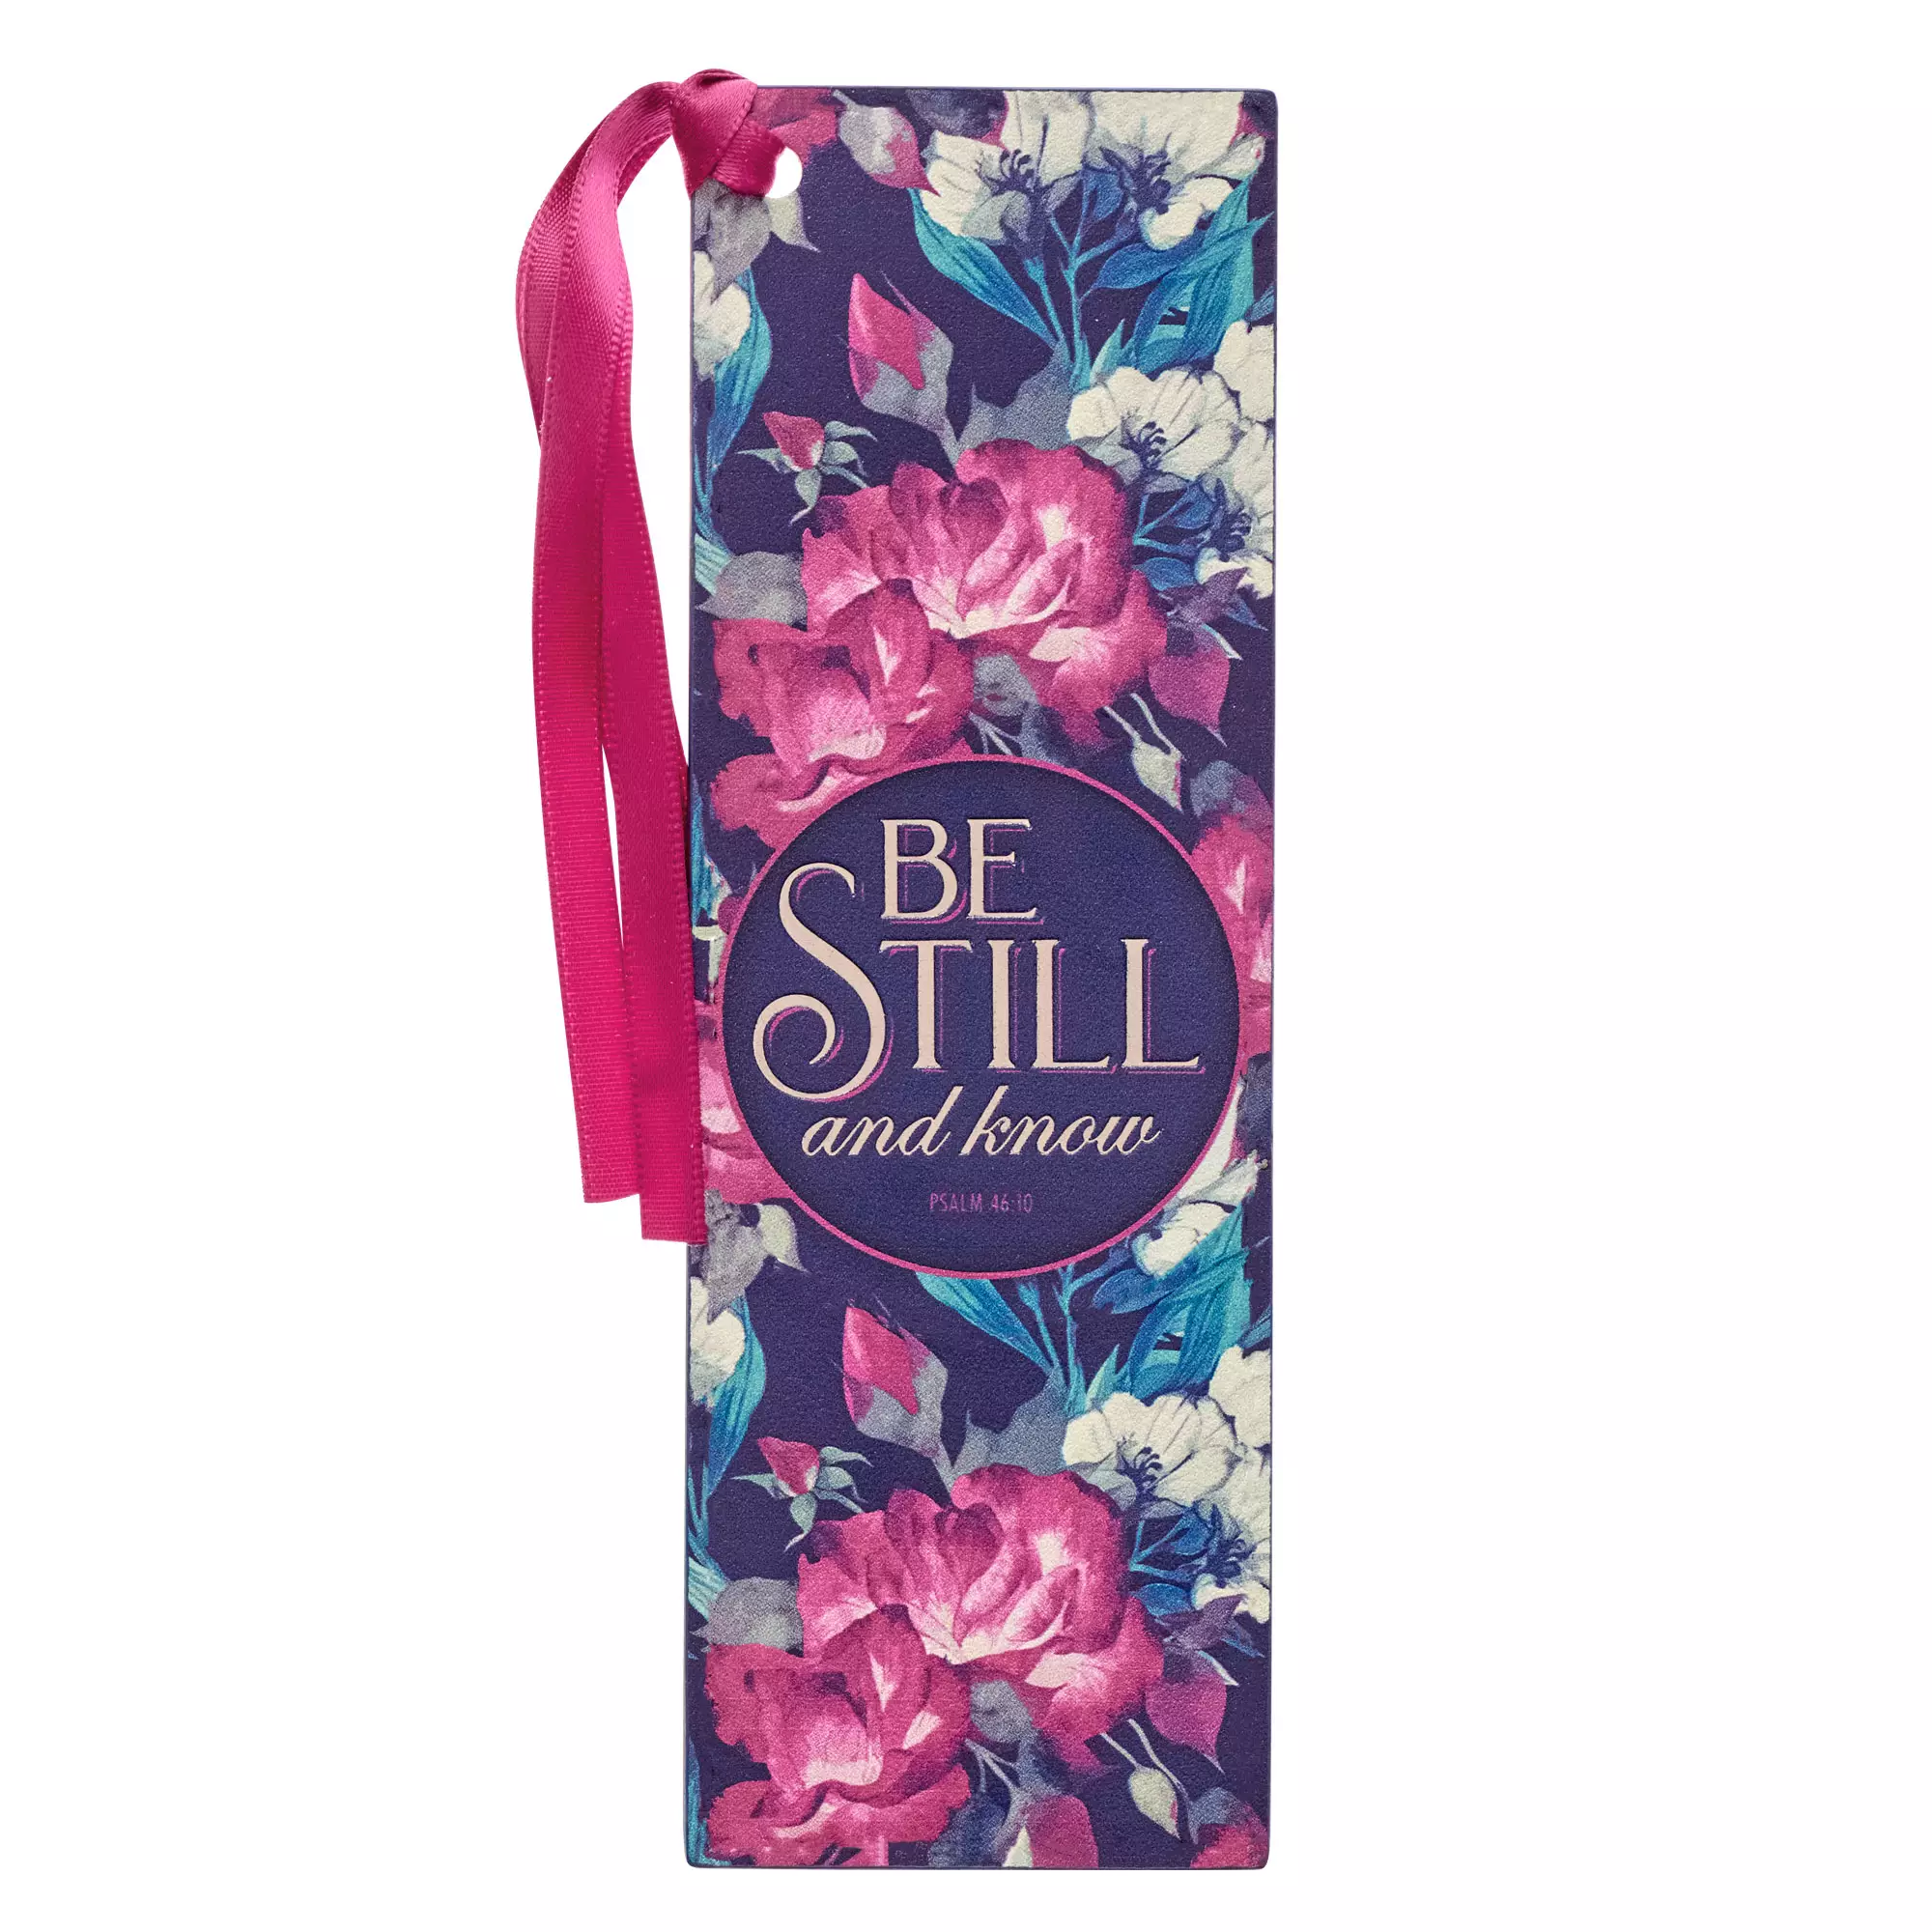 Bookmark-Pagemarker-Be Still And Know-Luxleather-Floral